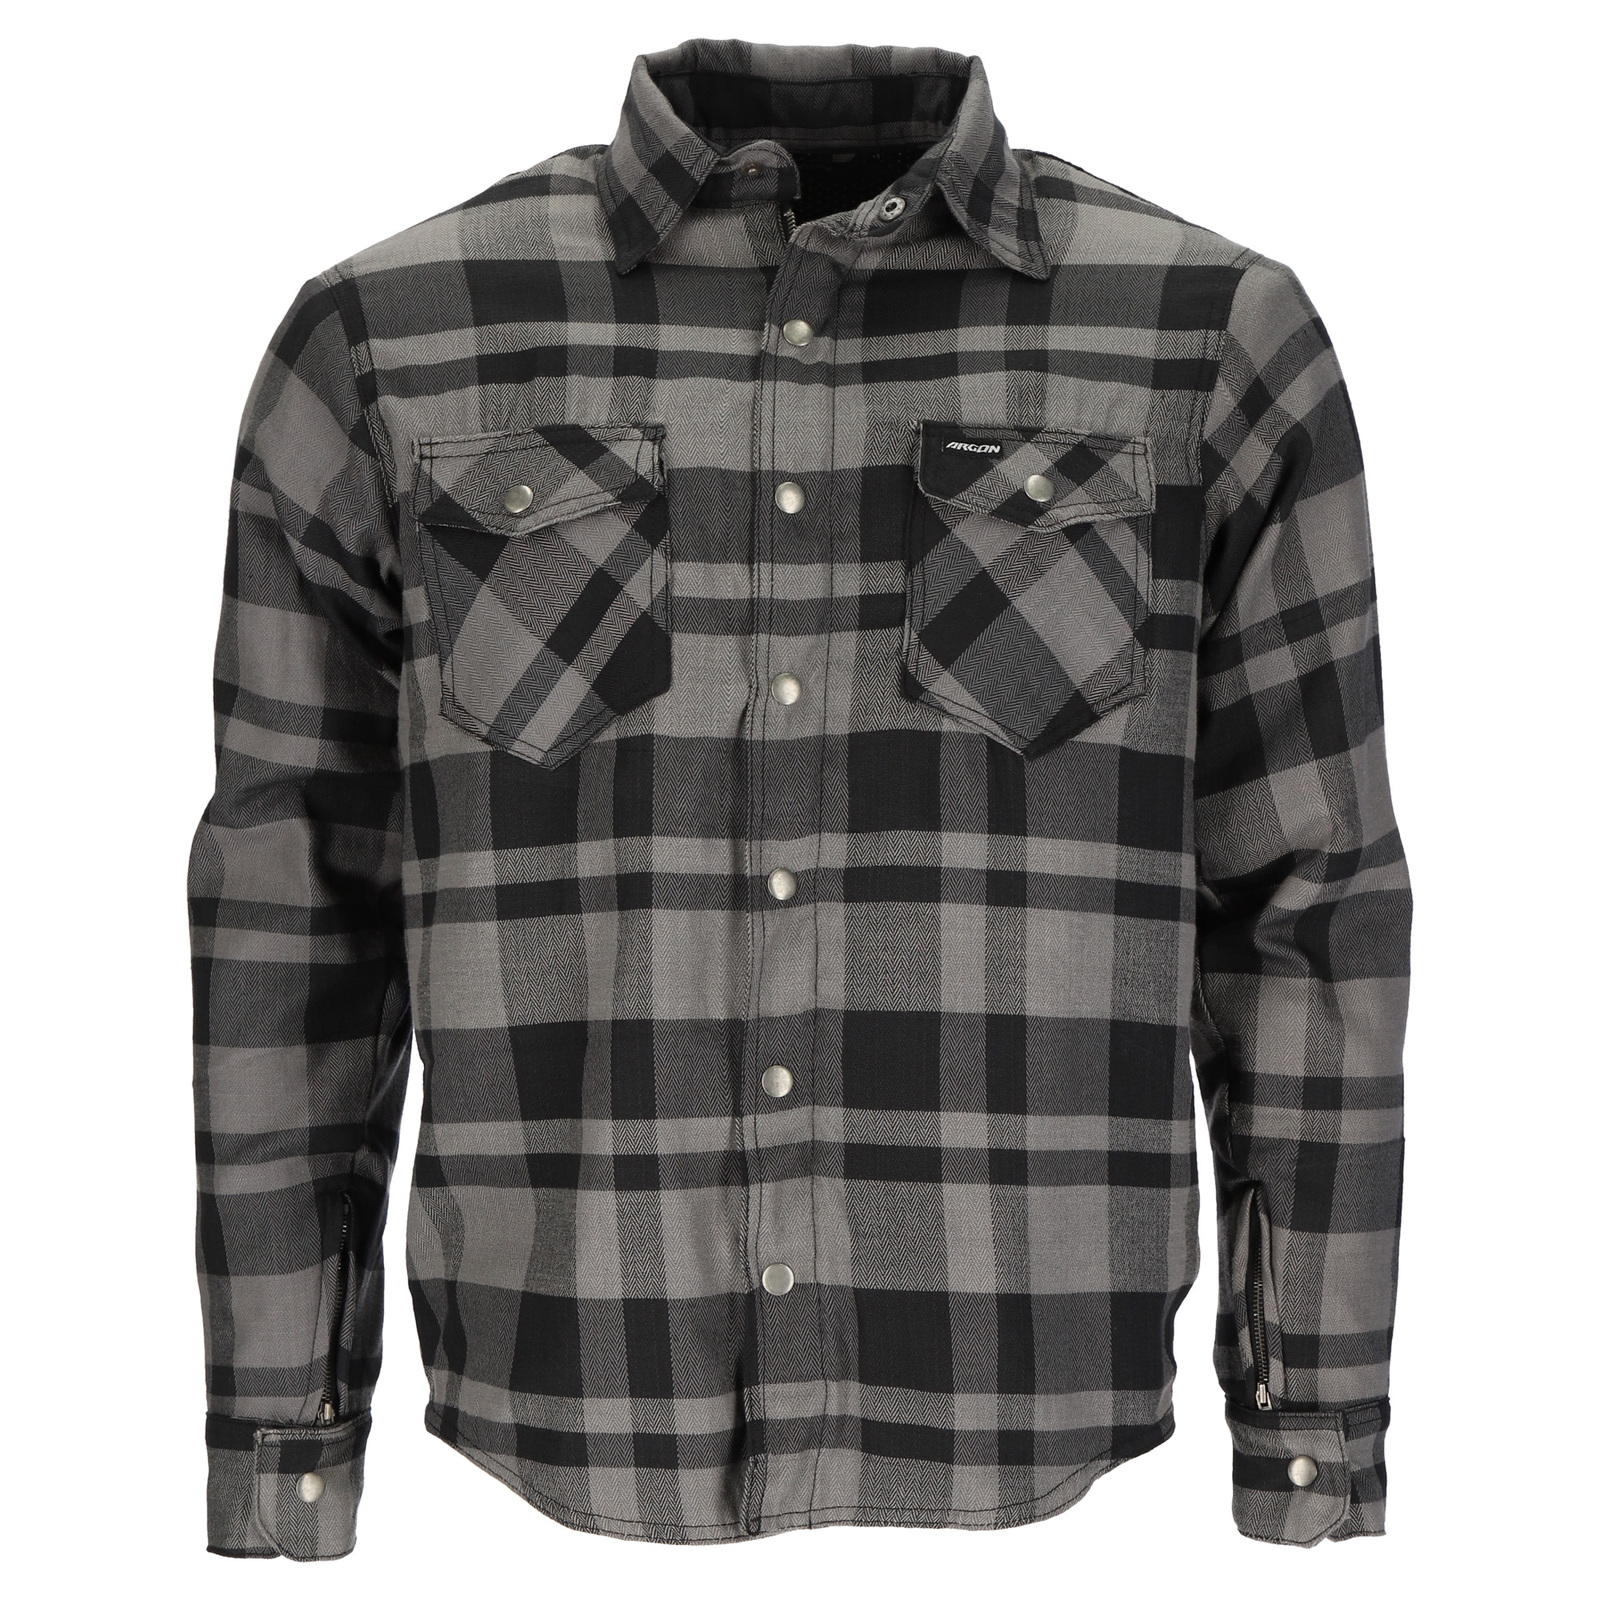 SAVAGE FLANNO JKT BLK GRY/46 (S).